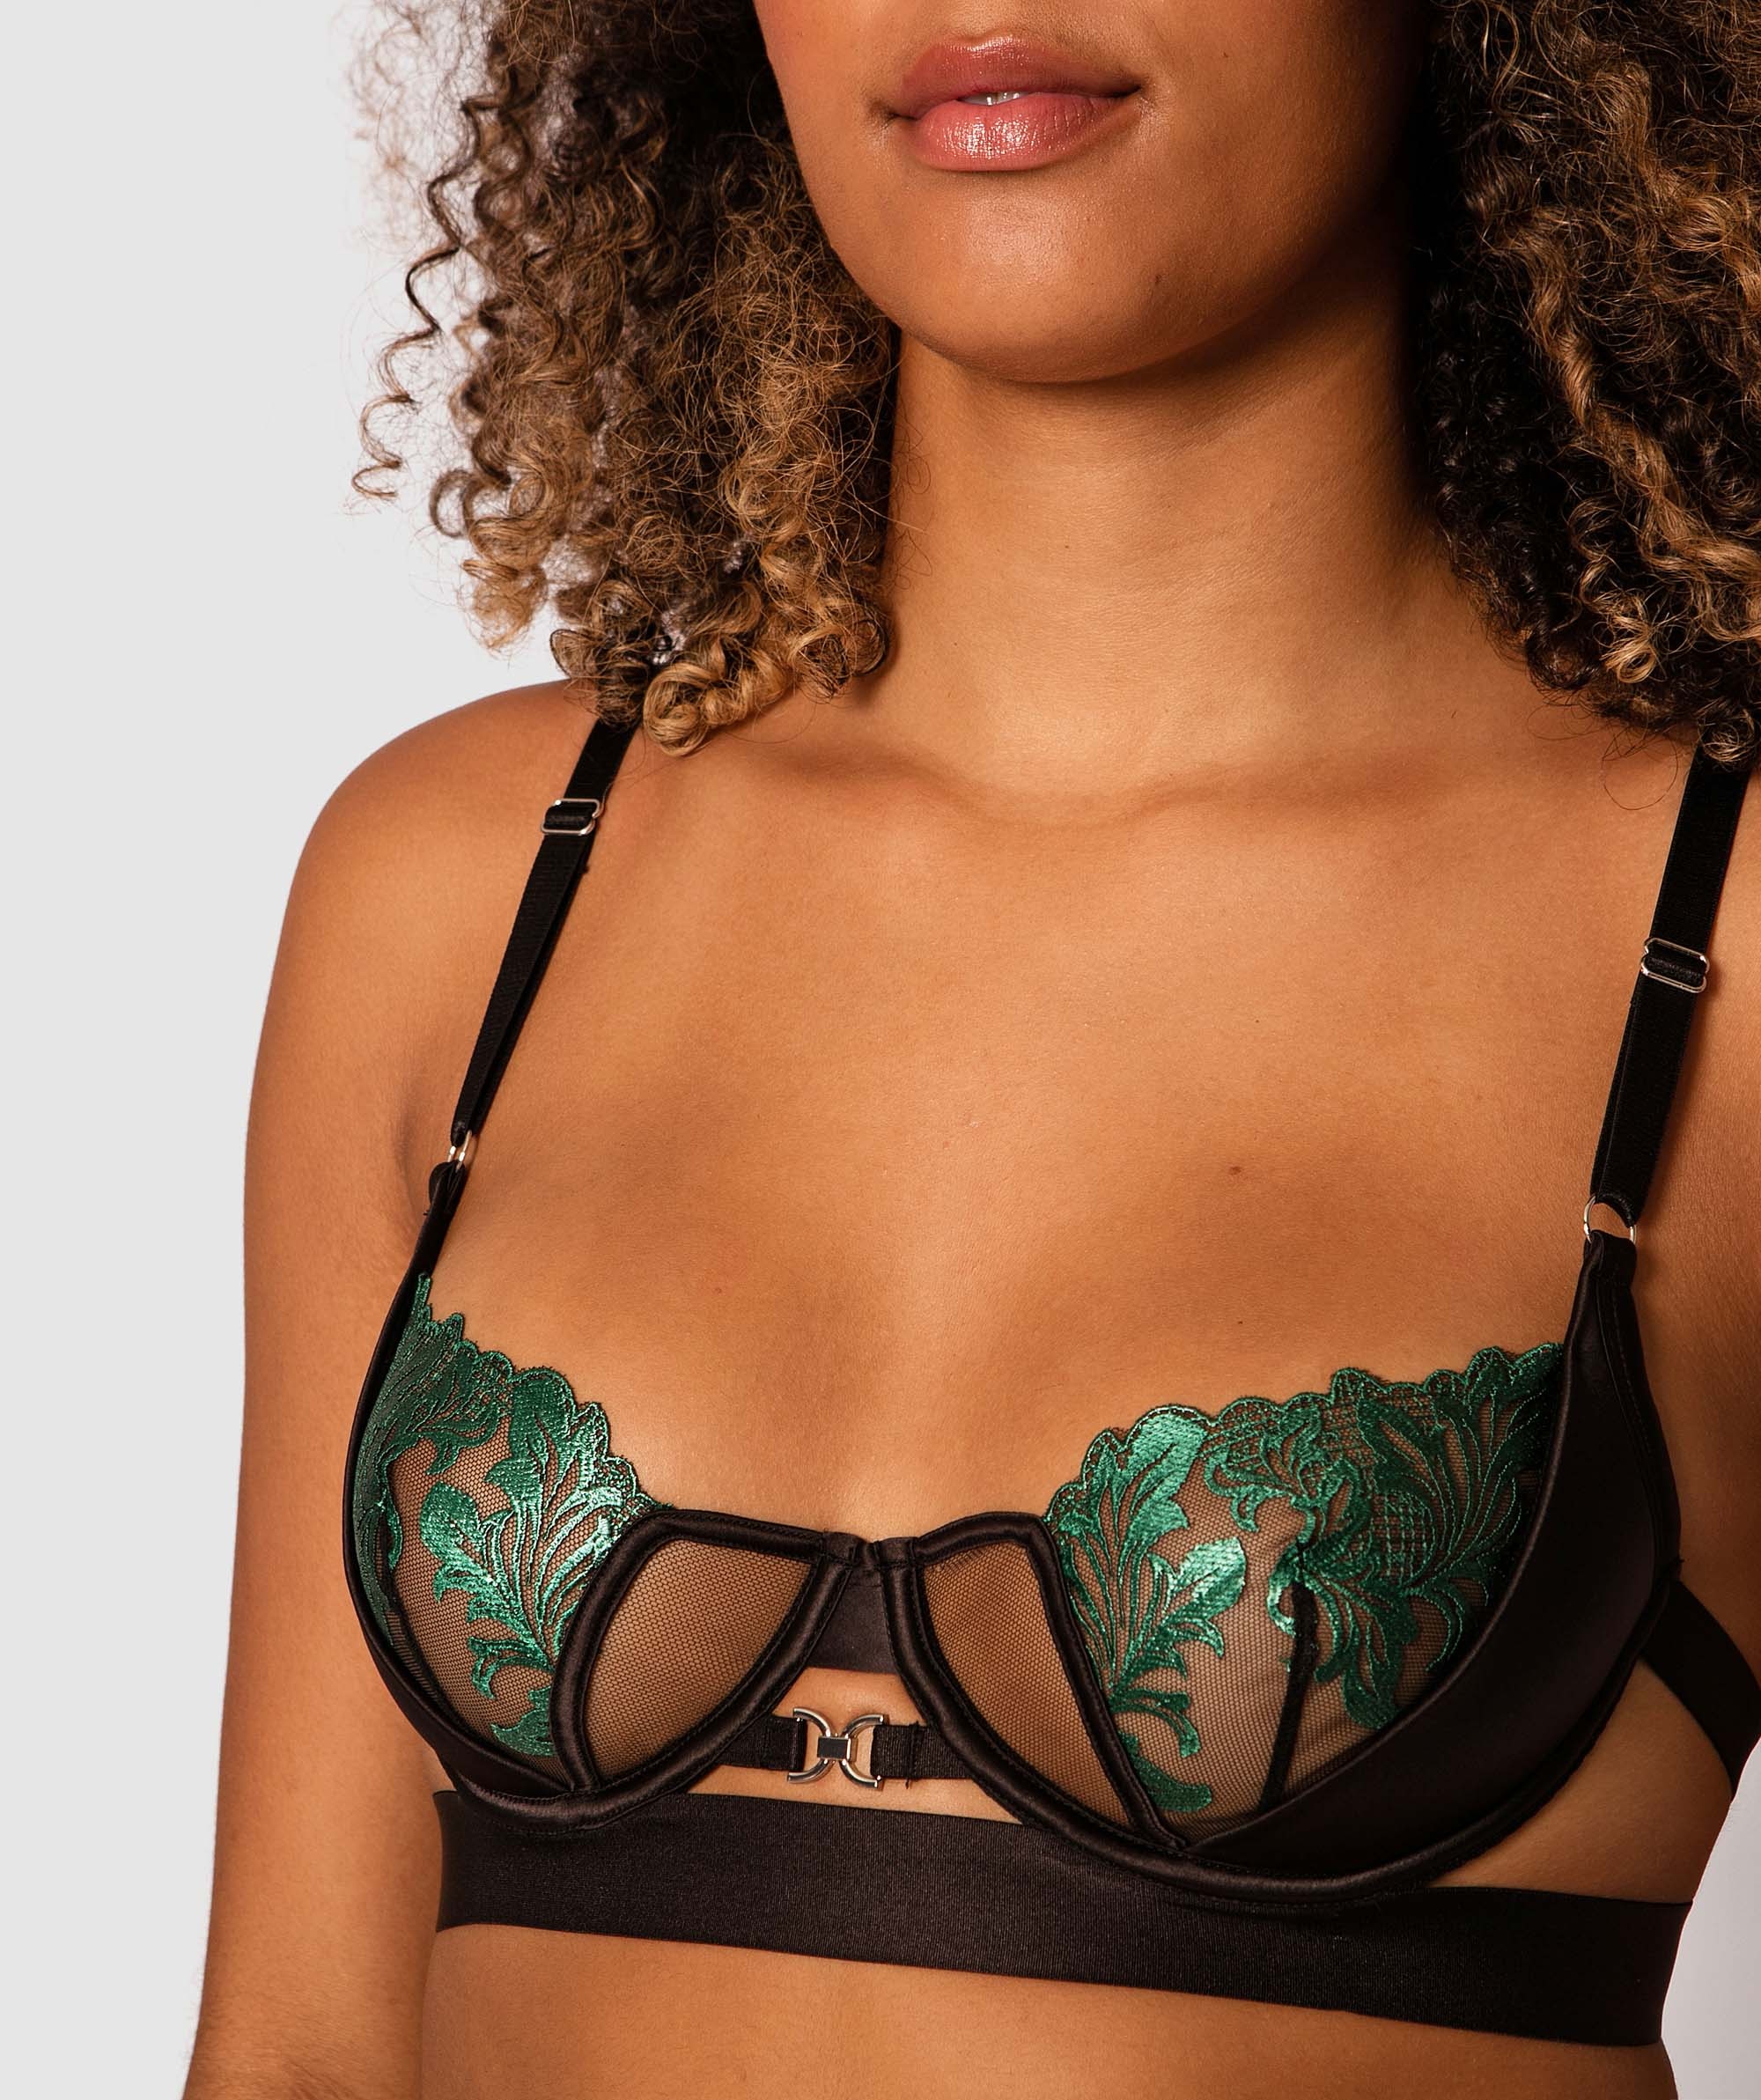 Forget Me Not Unlined Bra - Black/Green